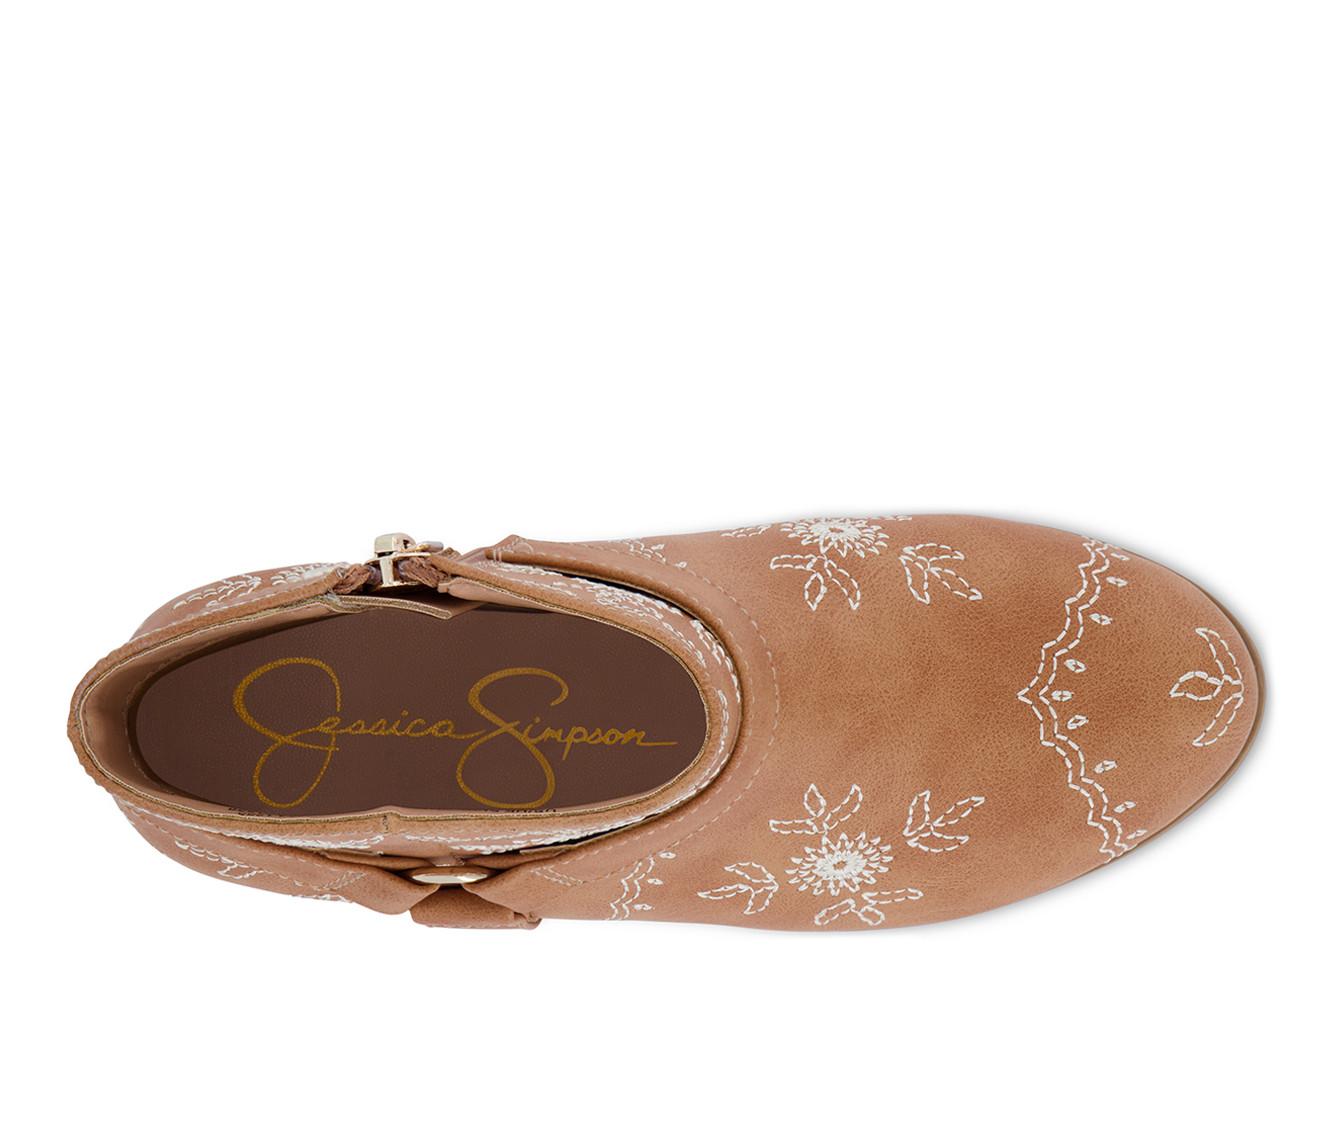 Girls' Jessica Simpson Little Kid & Big Layla Embroidered Ankle Booties